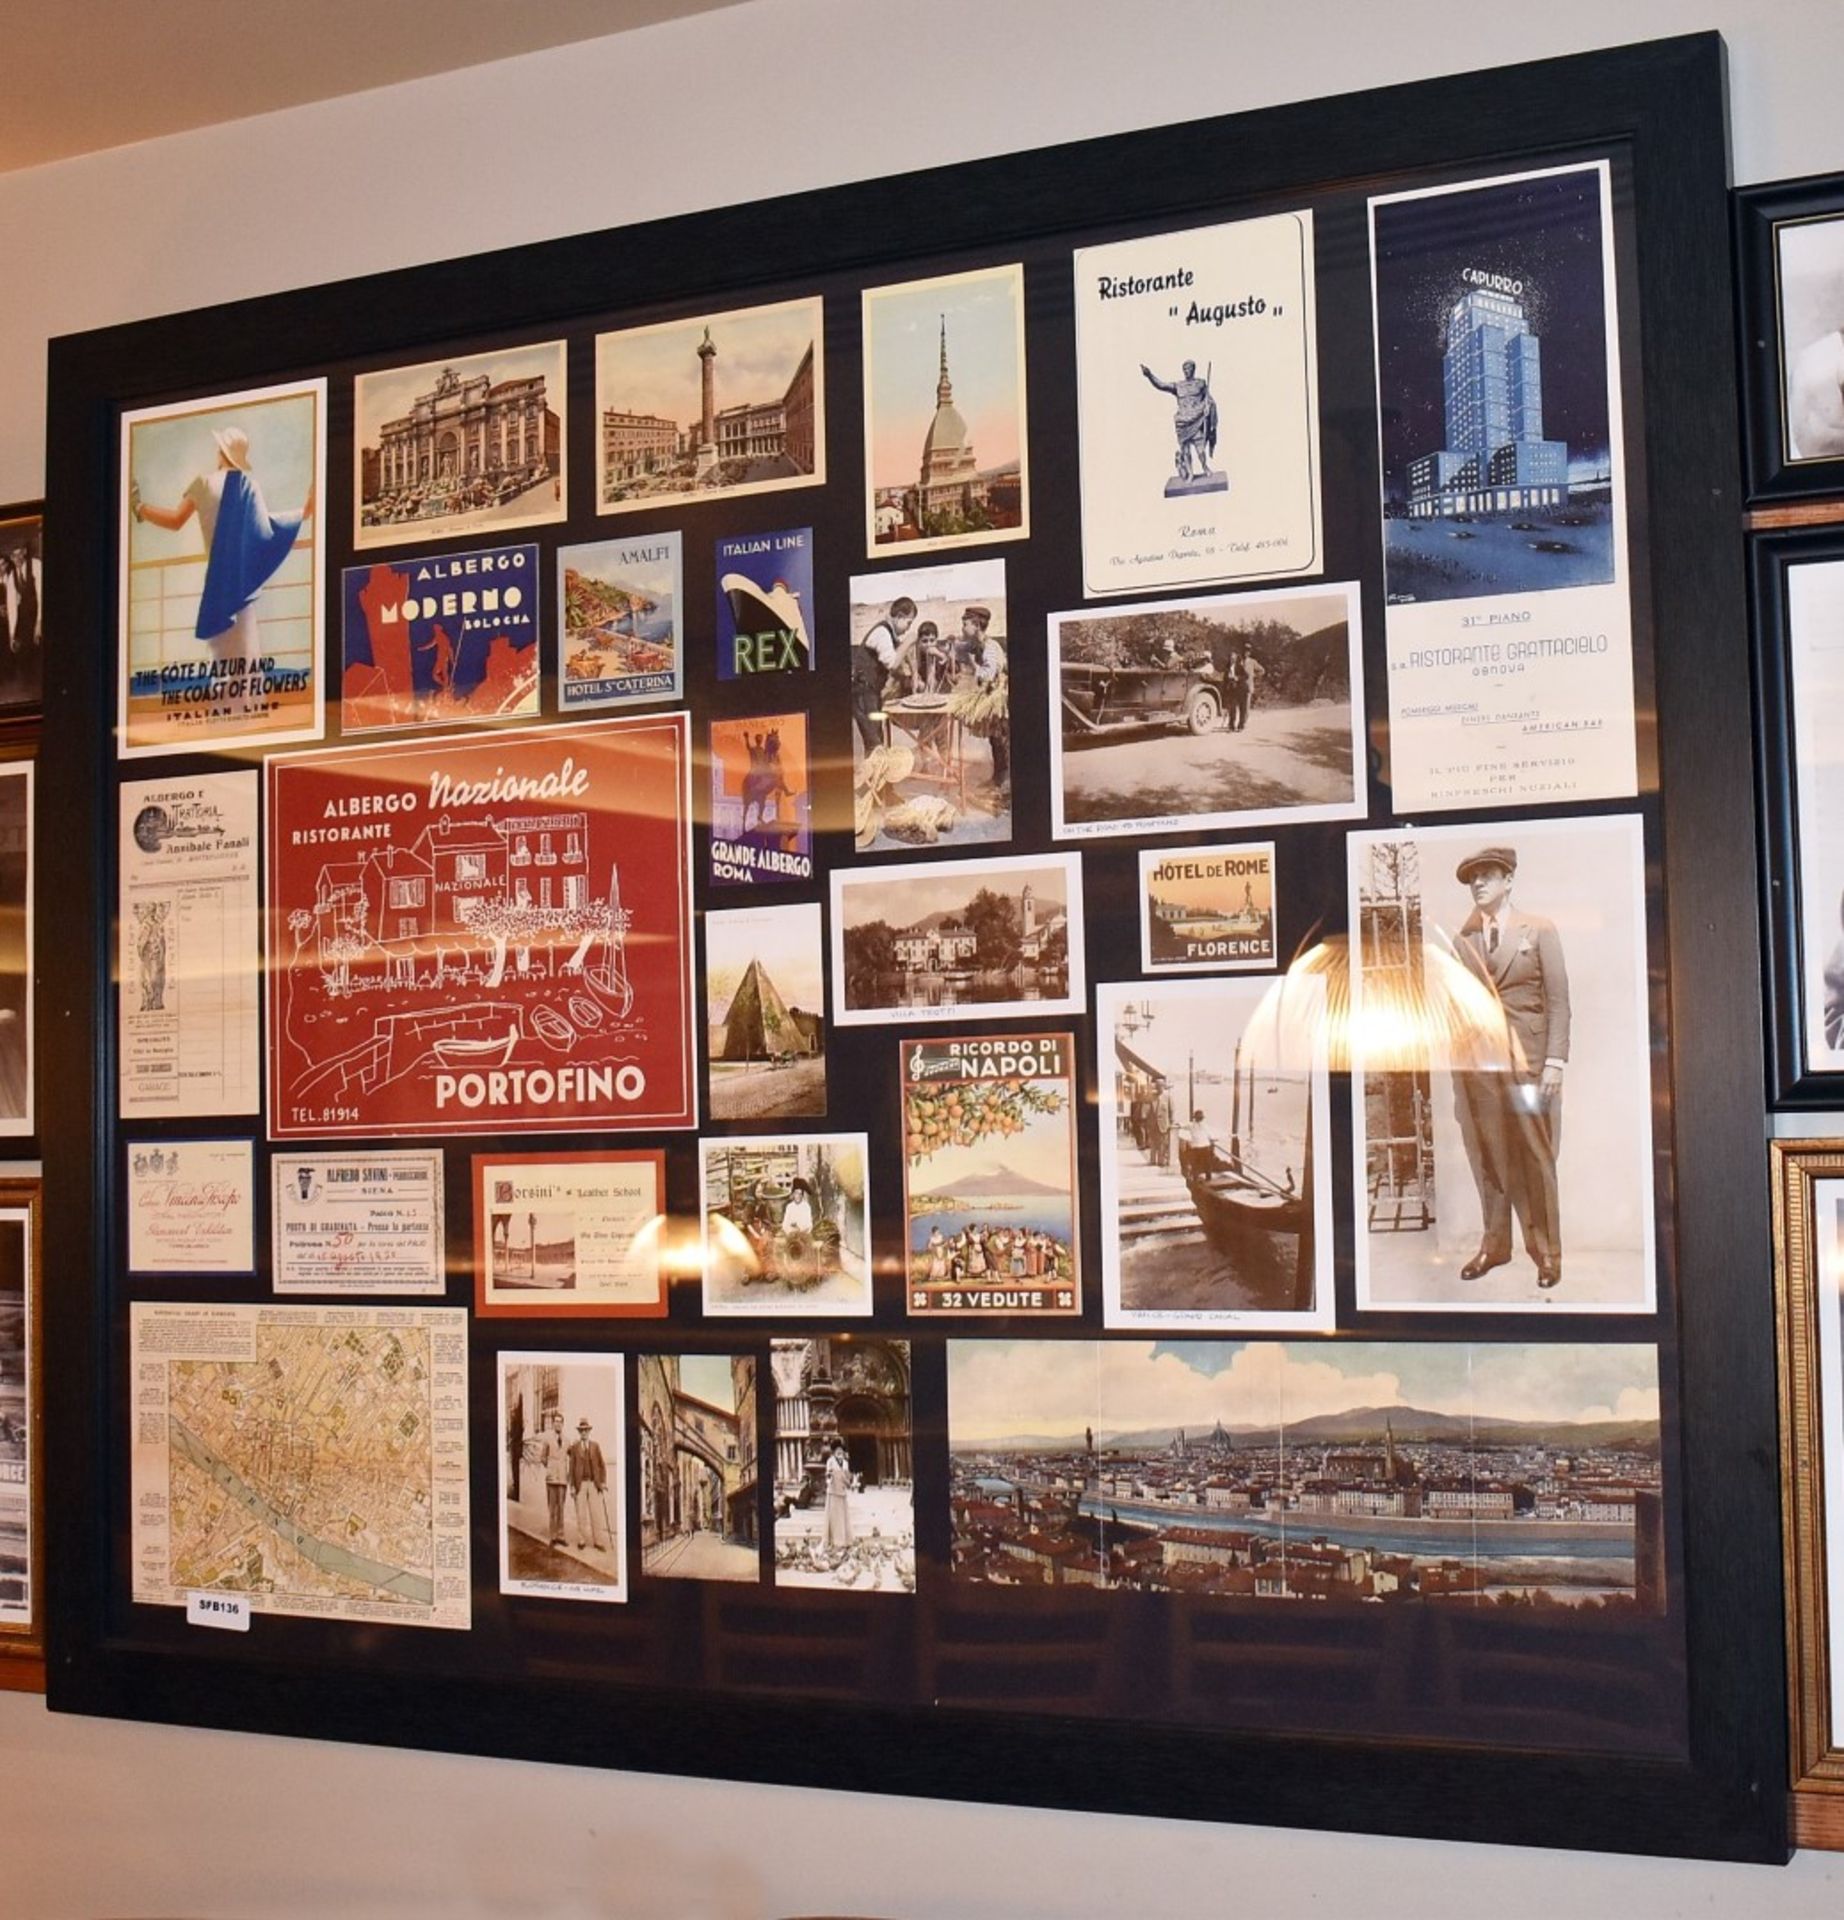 1 x  Large Framed Montage Featuring Nostalgic Italian Imagery - From a Popular American Diner -